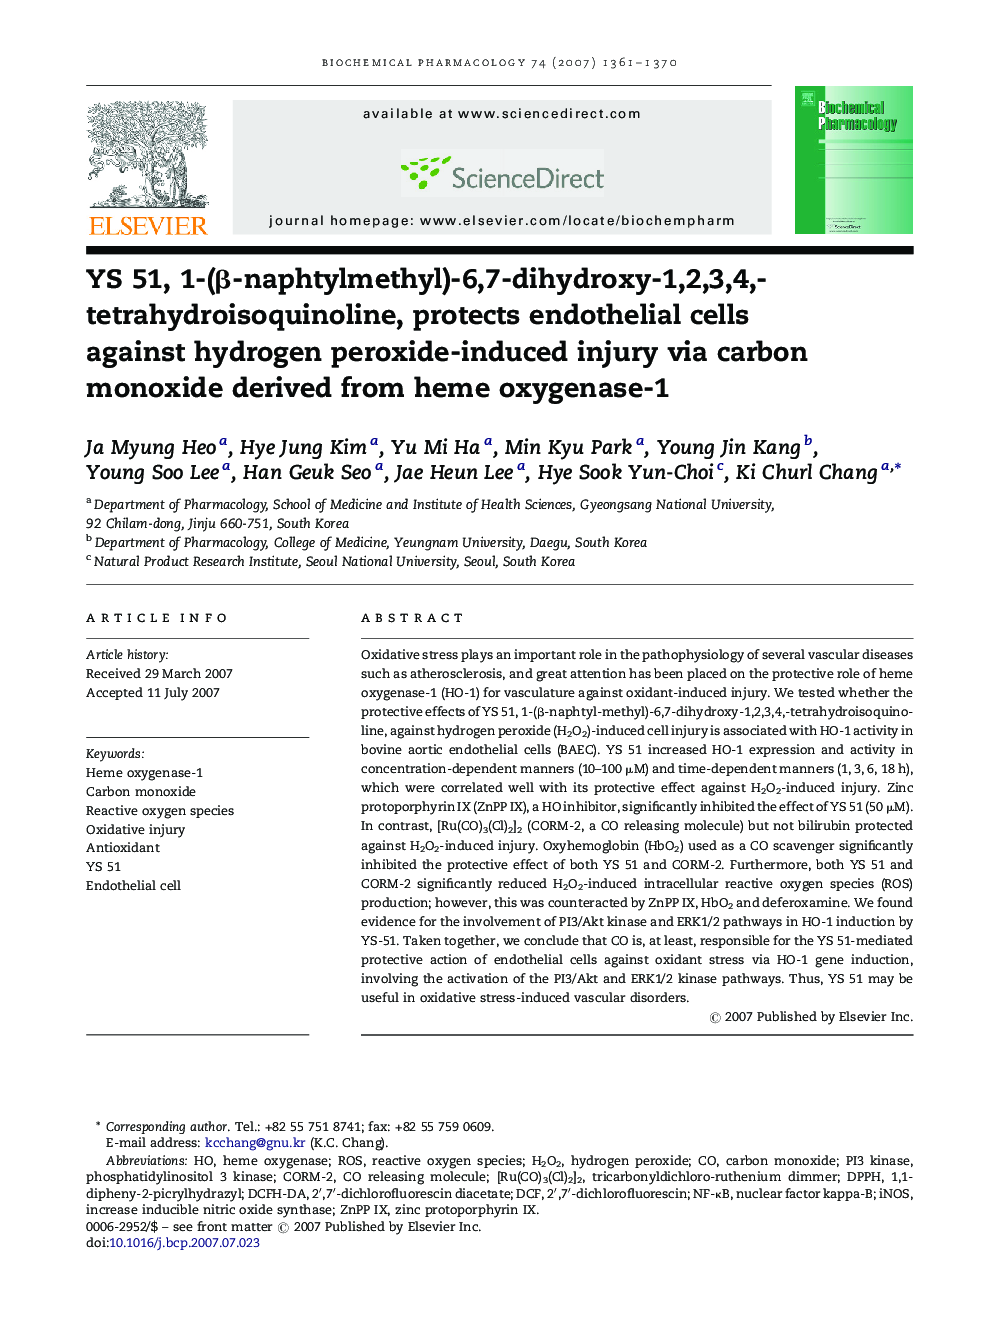 YS 51, 1-(β-naphtylmethyl)-6,7-dihydroxy-1,2,3,4,-tetrahydroisoquinoline, protects endothelial cells against hydrogen peroxide-induced injury via carbon monoxide derived from heme oxygenase-1